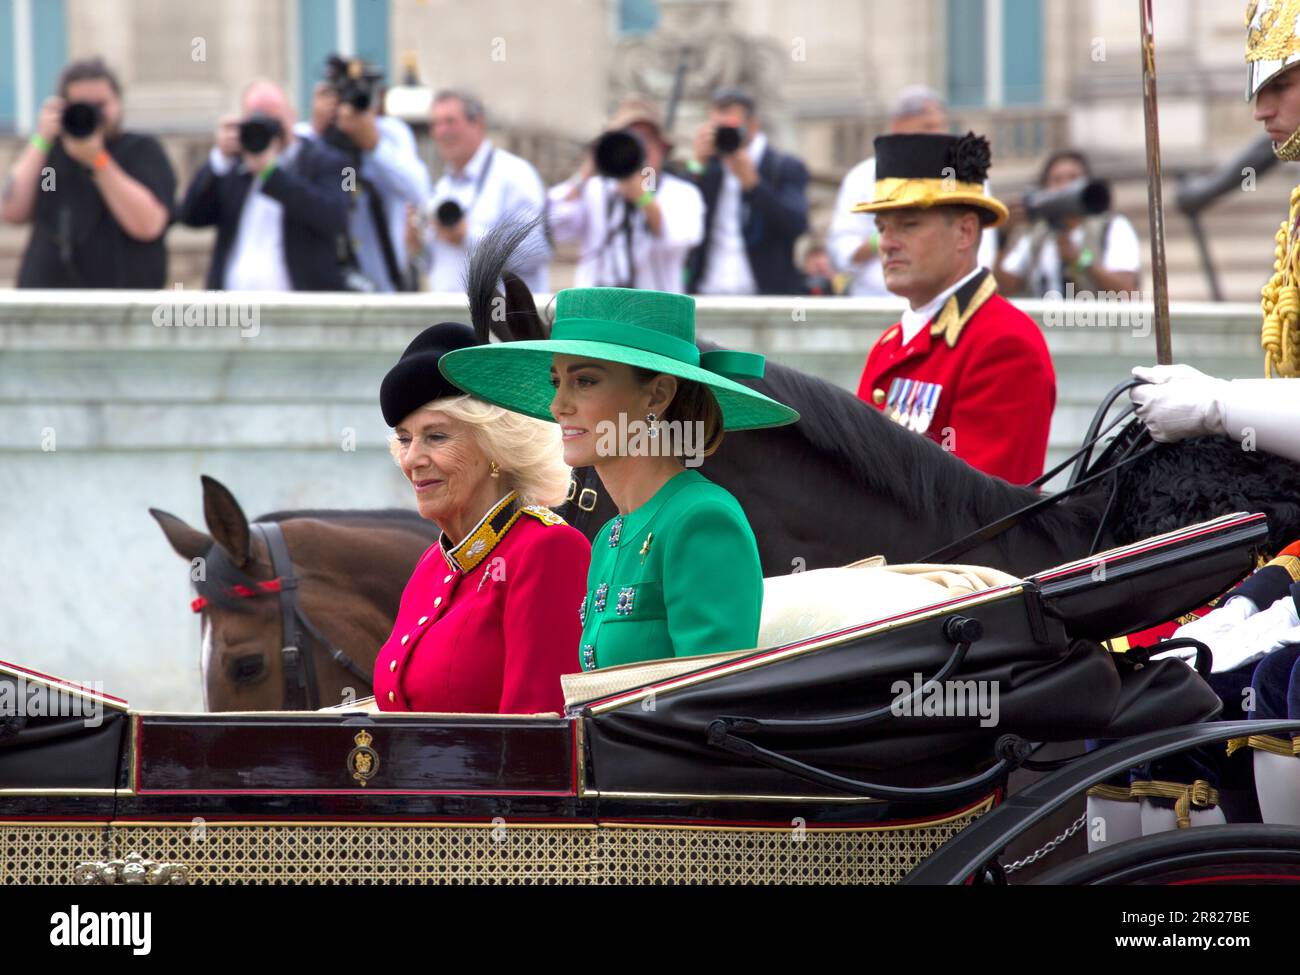 Queen Camilla und Catherine Princess of Wales in Open Horse Draw Carriage Trooping the Colour Color The Mall London England Stockfoto